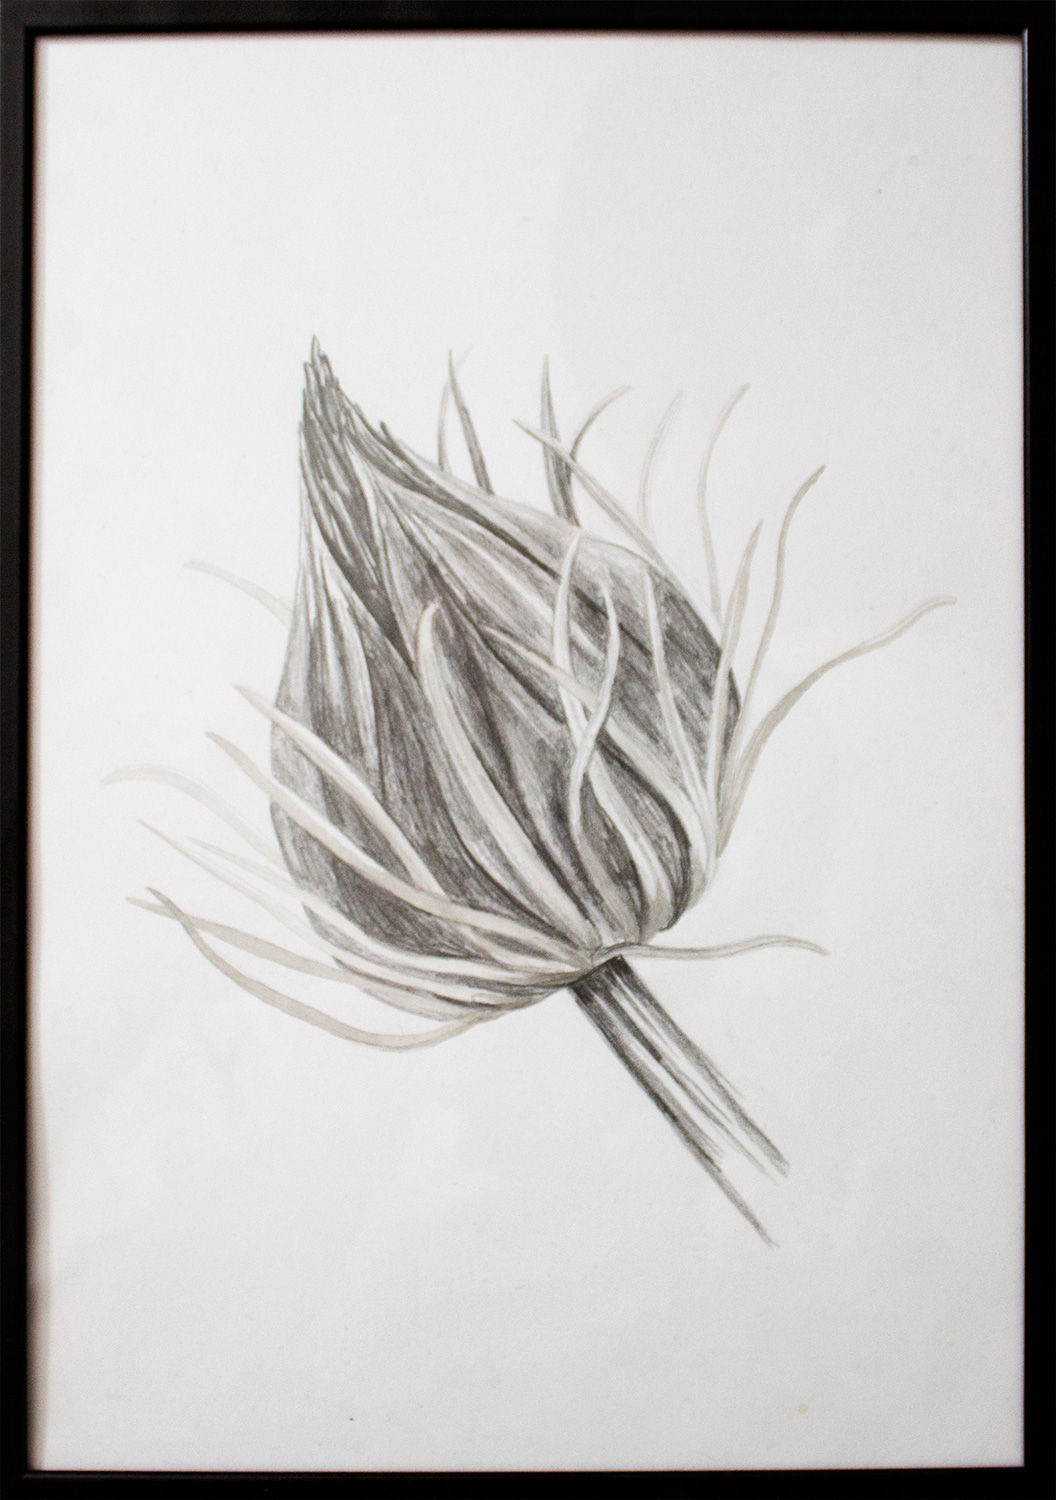 drawings, aesthetic, family-friendly, figurative, landscape, monochrome, botany, black, white, paper, pencils, beautiful, black-and-white, flowers, interior, interior-design, natural, naturalism, plants, pretty, Buy original high quality art. Paintings, drawings, limited edition prints & posters by talented artists.